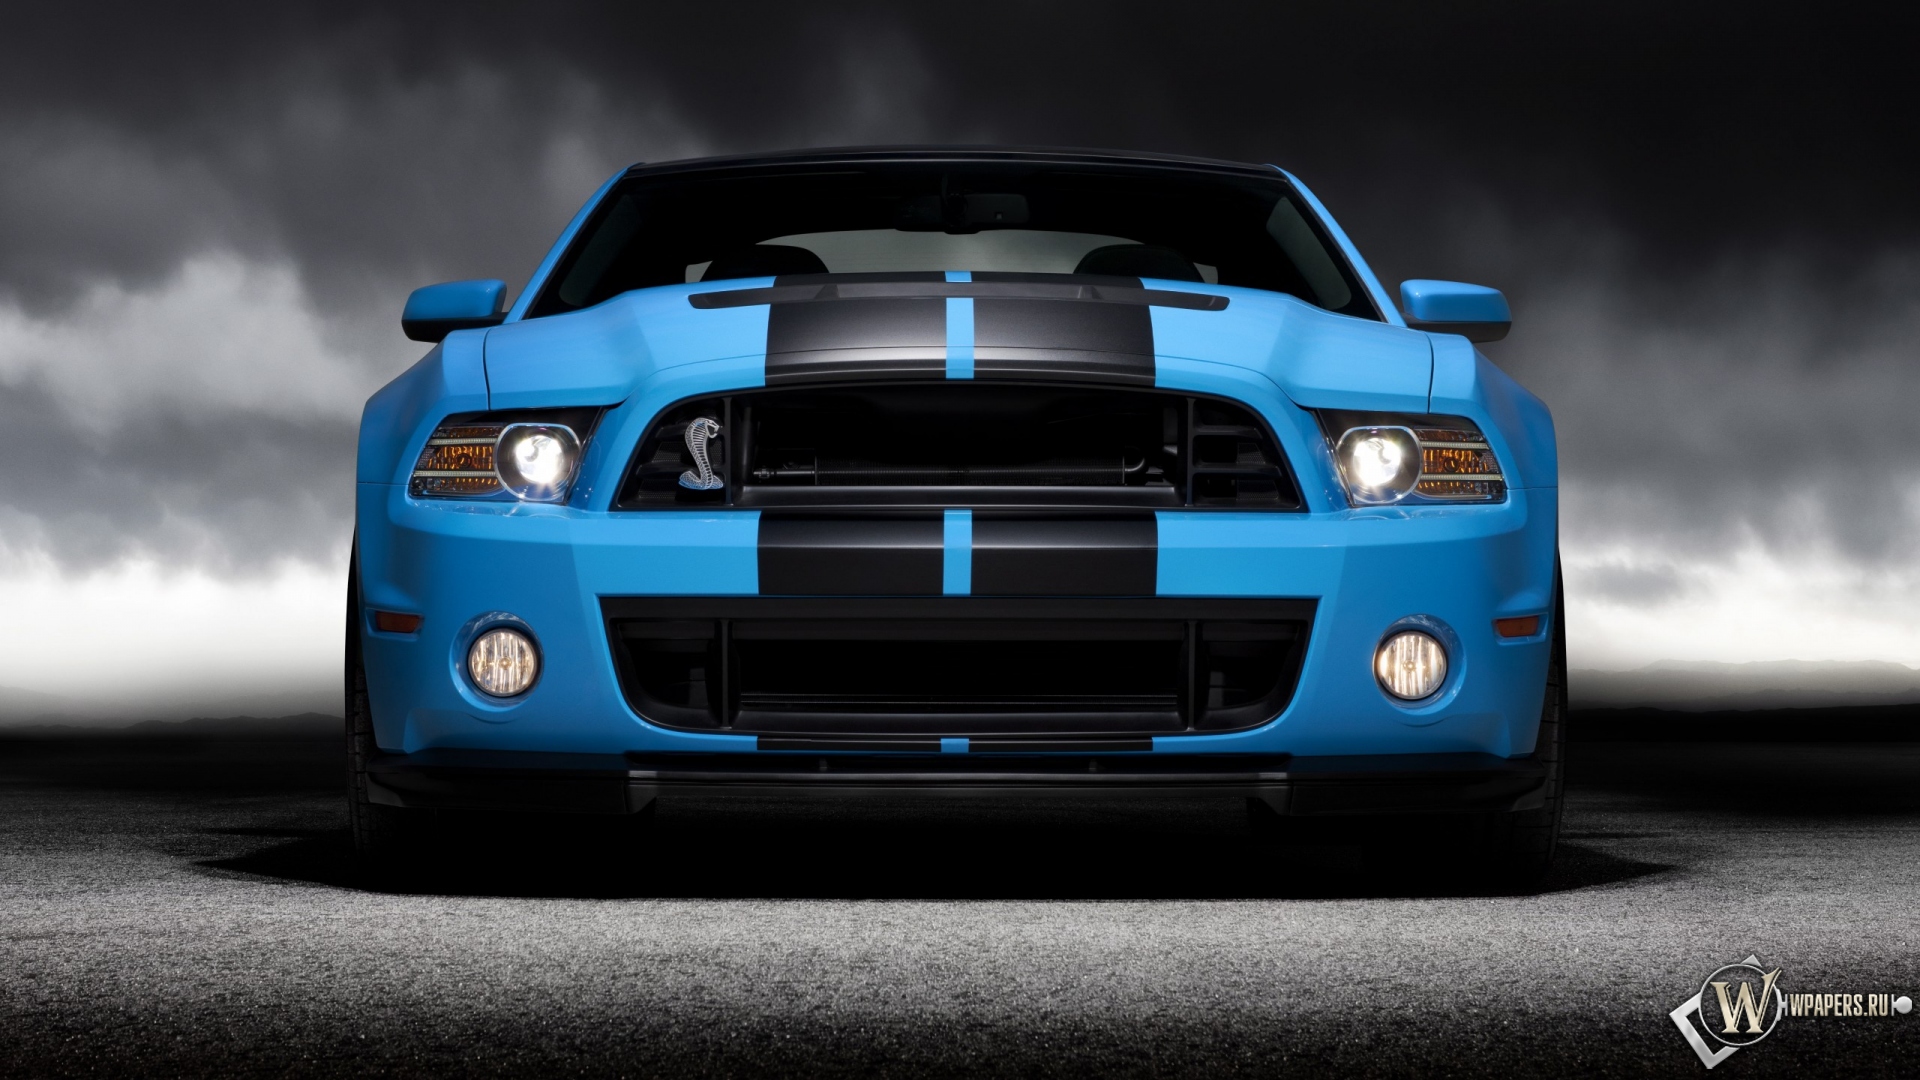 2013 Ford Mustang Shelby GT500 1920x1080